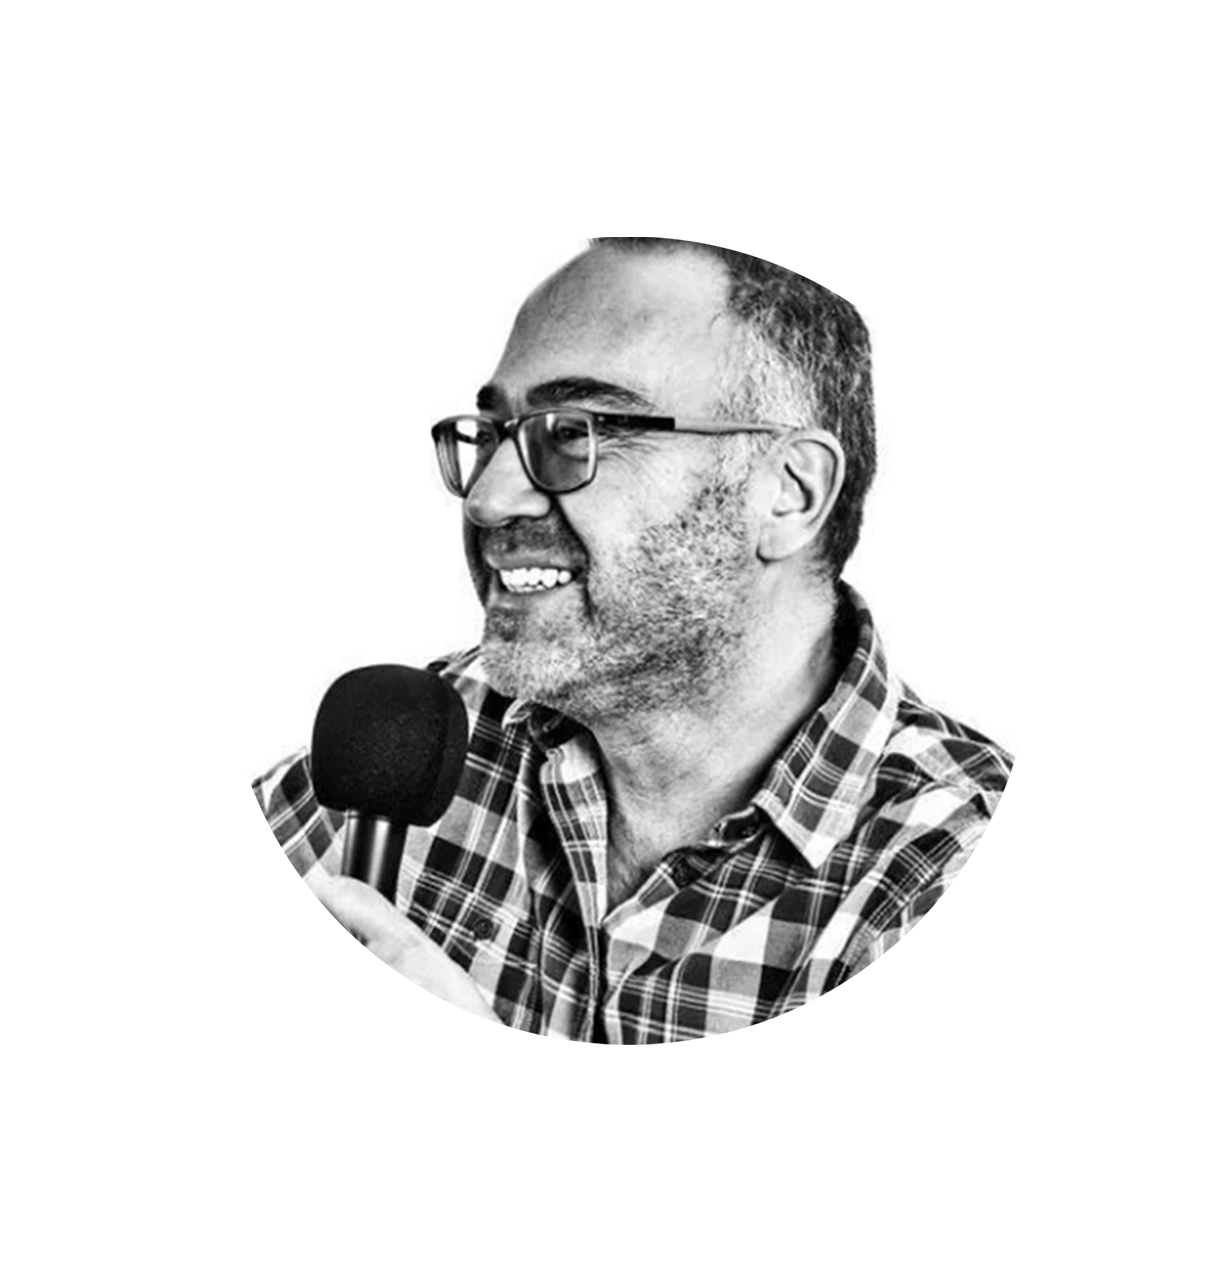 Your London Legacy by Steve Lazarus - coached in podcasting by Mark Asquith on the Podcast Accelerator